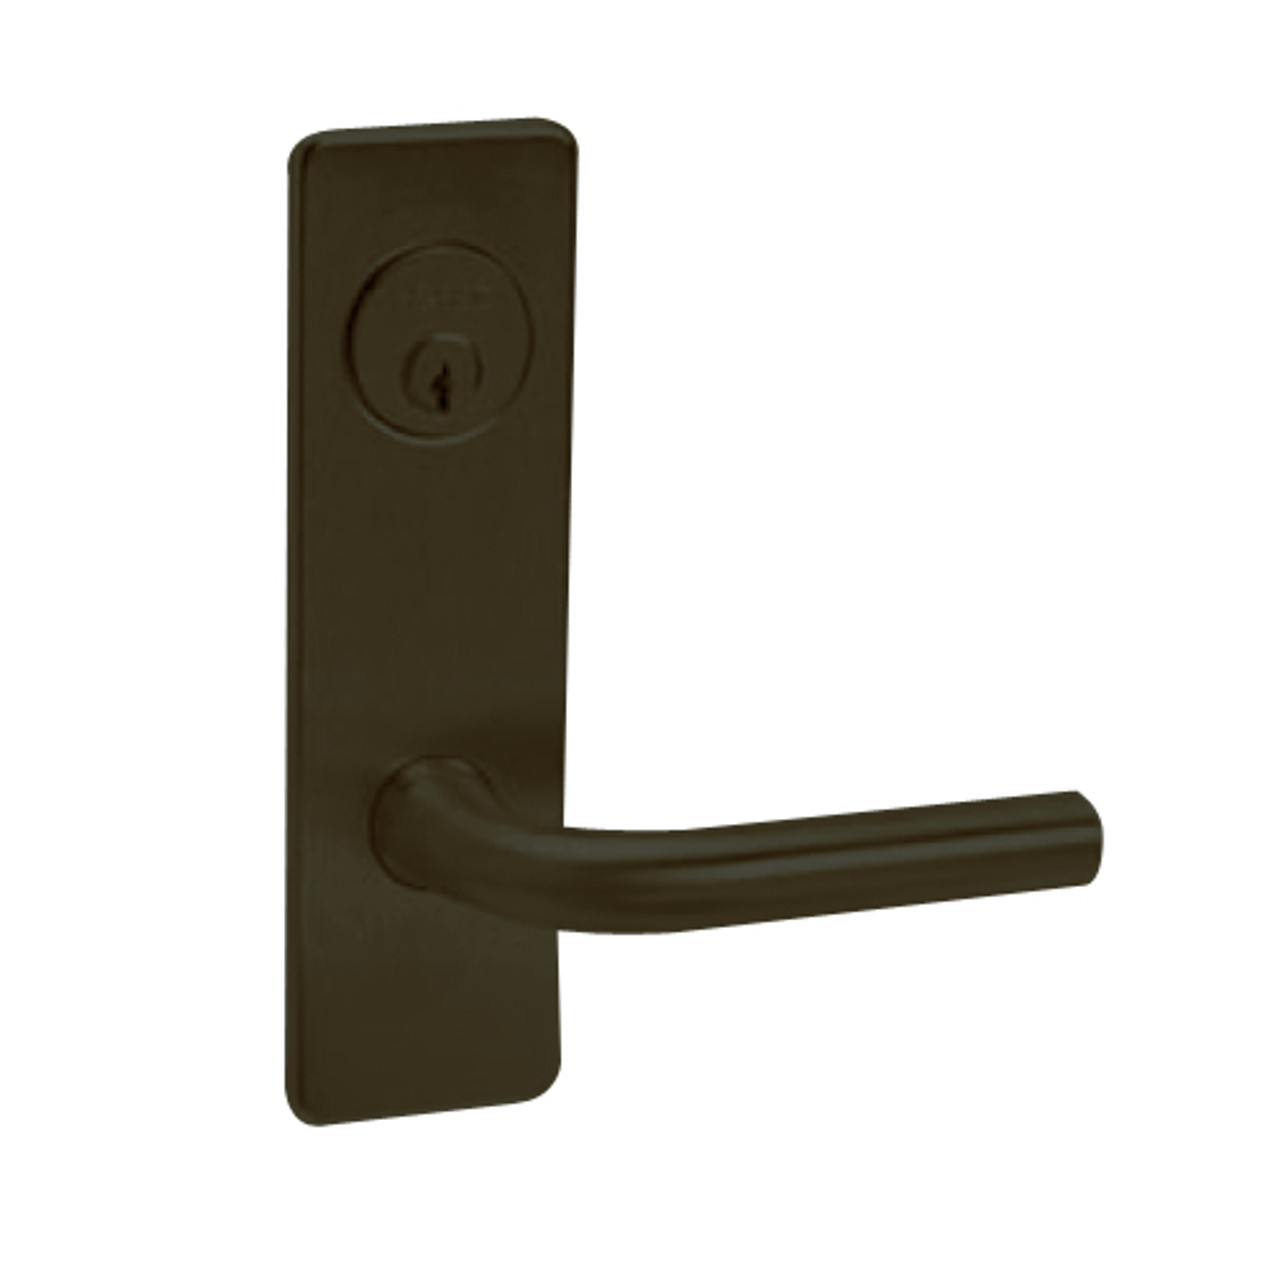 ML2024-RSP-613 Corbin Russwin ML2000 Series Mortise Entrance Locksets with Regis Lever and Deadbolt in Oil Rubbed Bronze